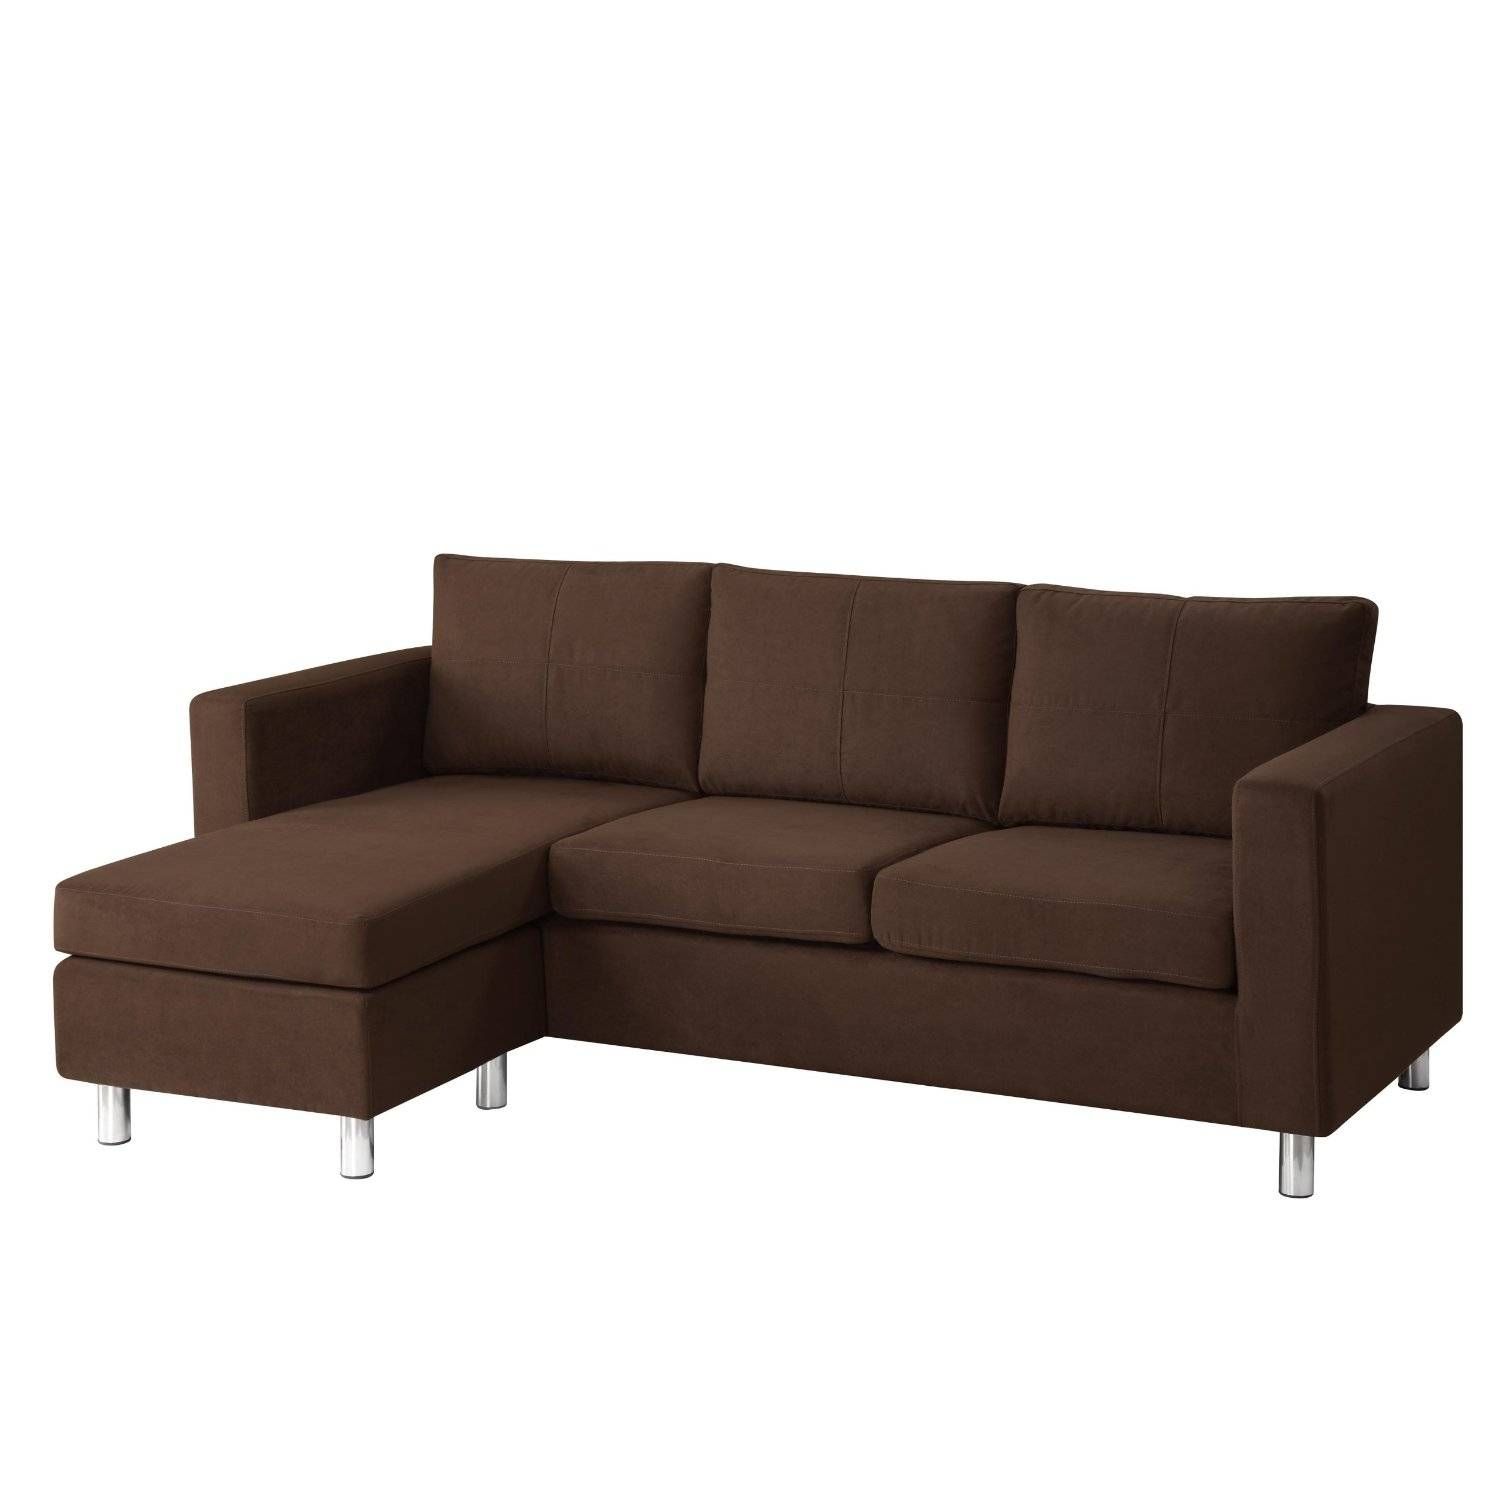 Small Terracota Armless Sectional Sofas With Sleeper – S3net With Regard To Small Armless Sofa (View 26 of 26)